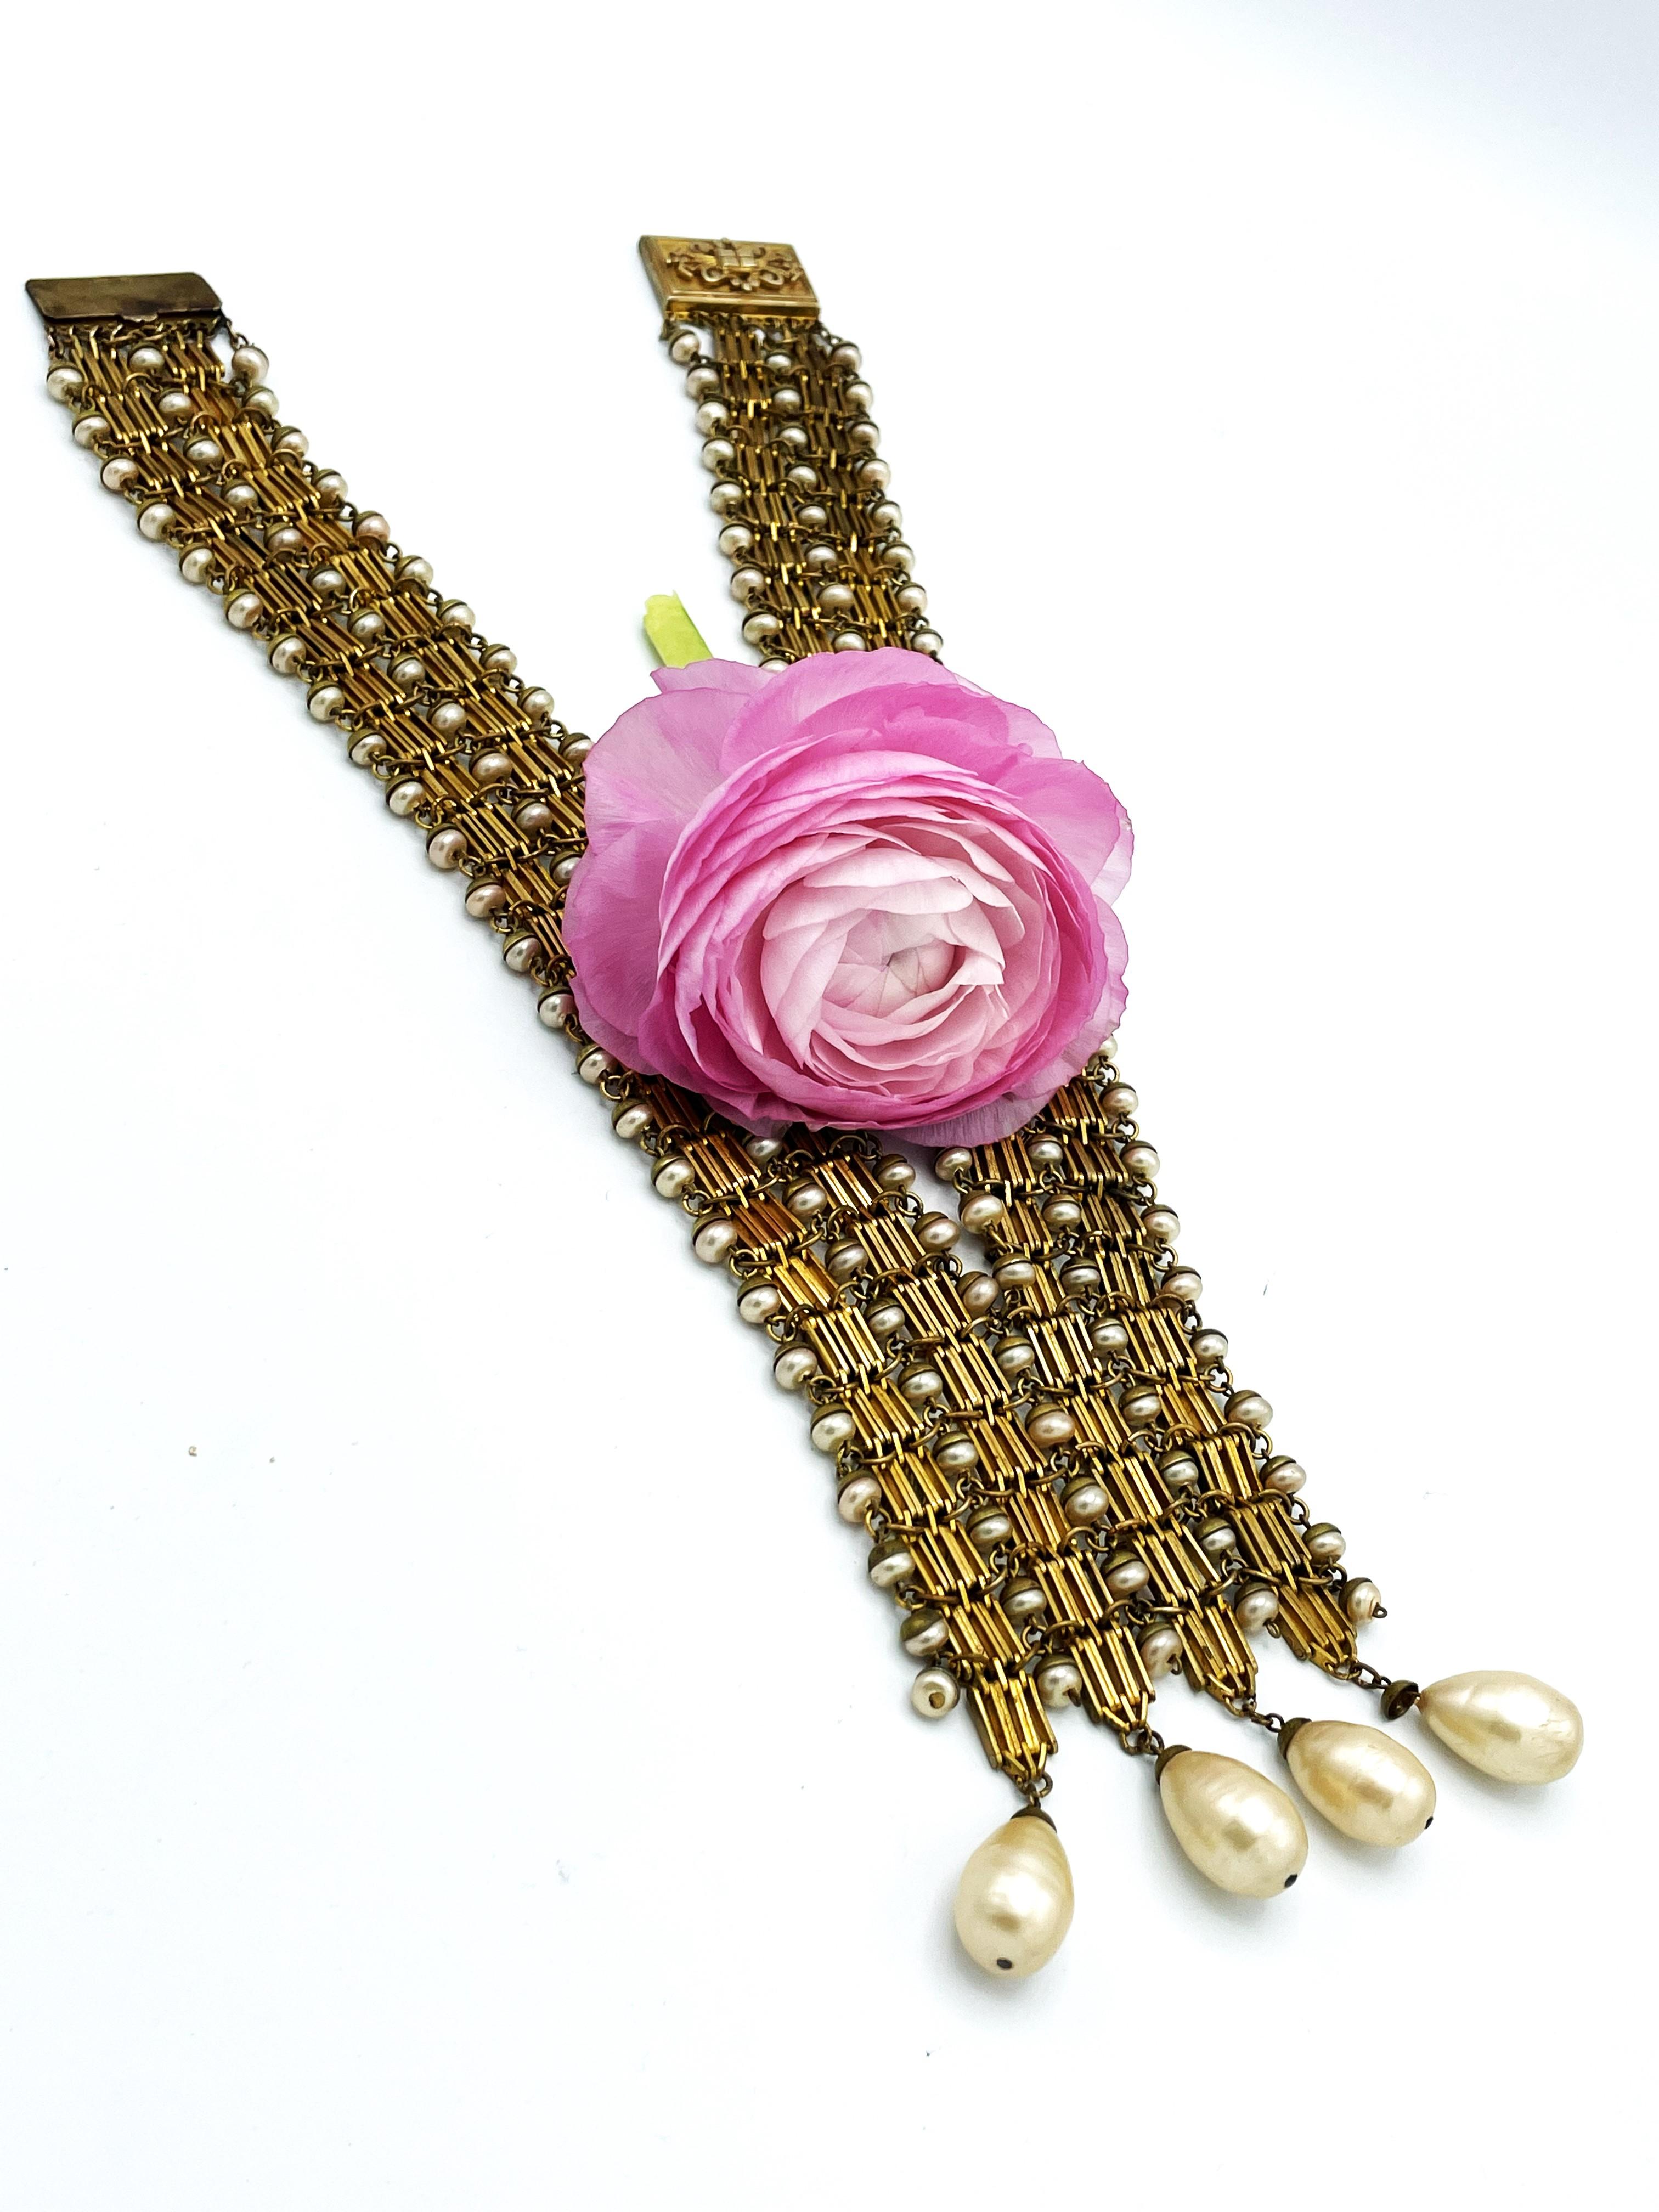  V-SHAPED NECKLACE, early 1940's, gold plated, handmade pearls, Made in France  For Sale 4